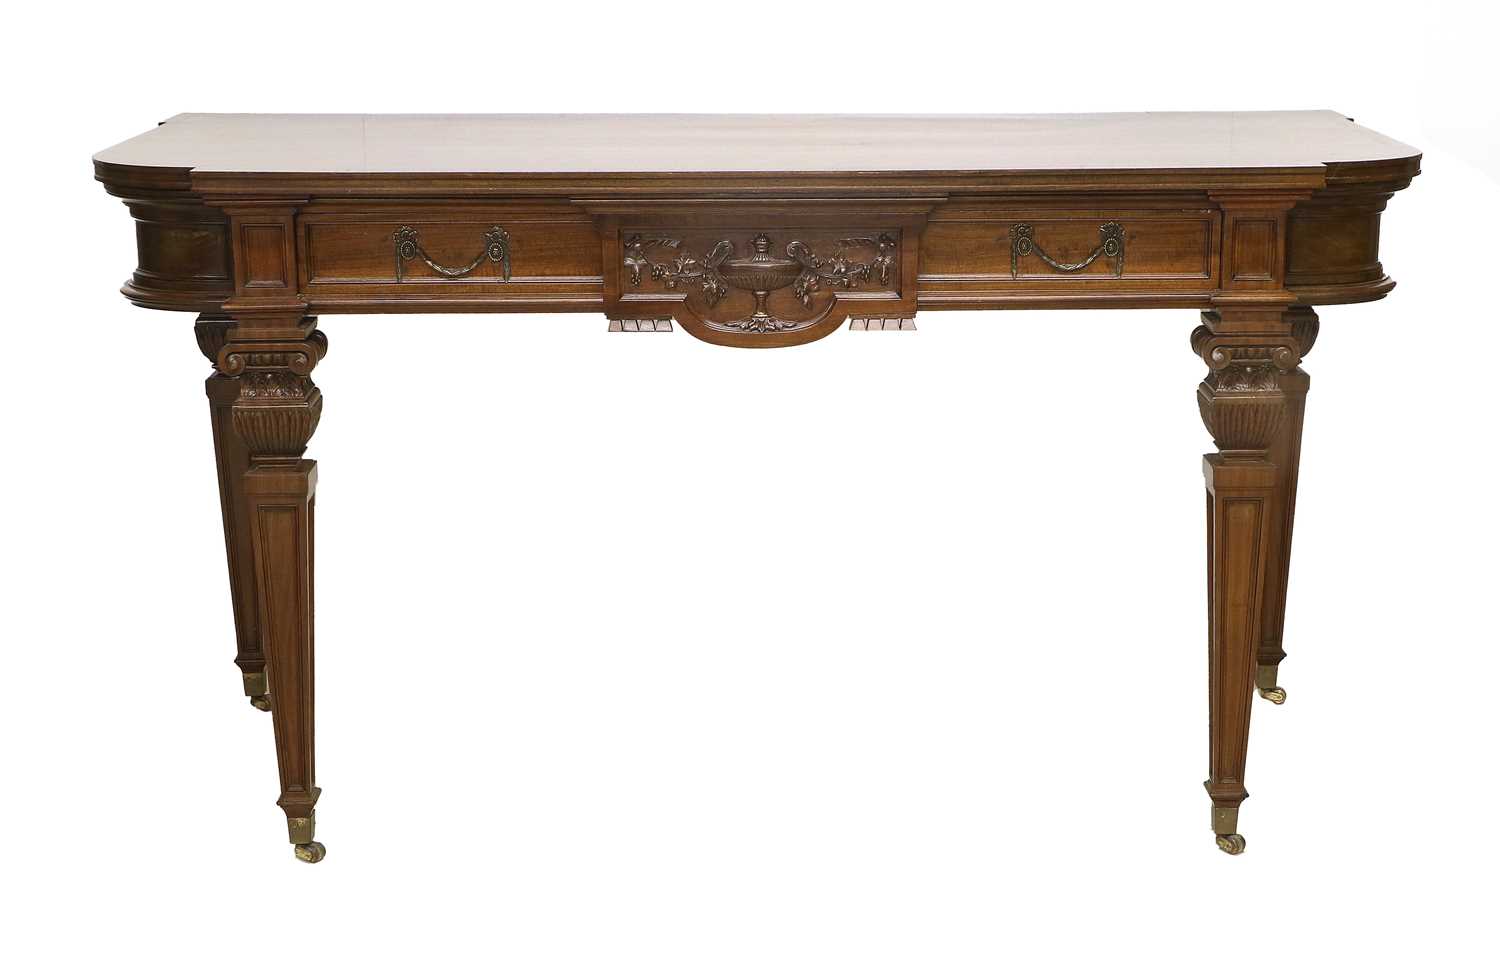 A Victorian Carved Mahogany and Crossbanded Serving Table, late 19th century, the moulded top